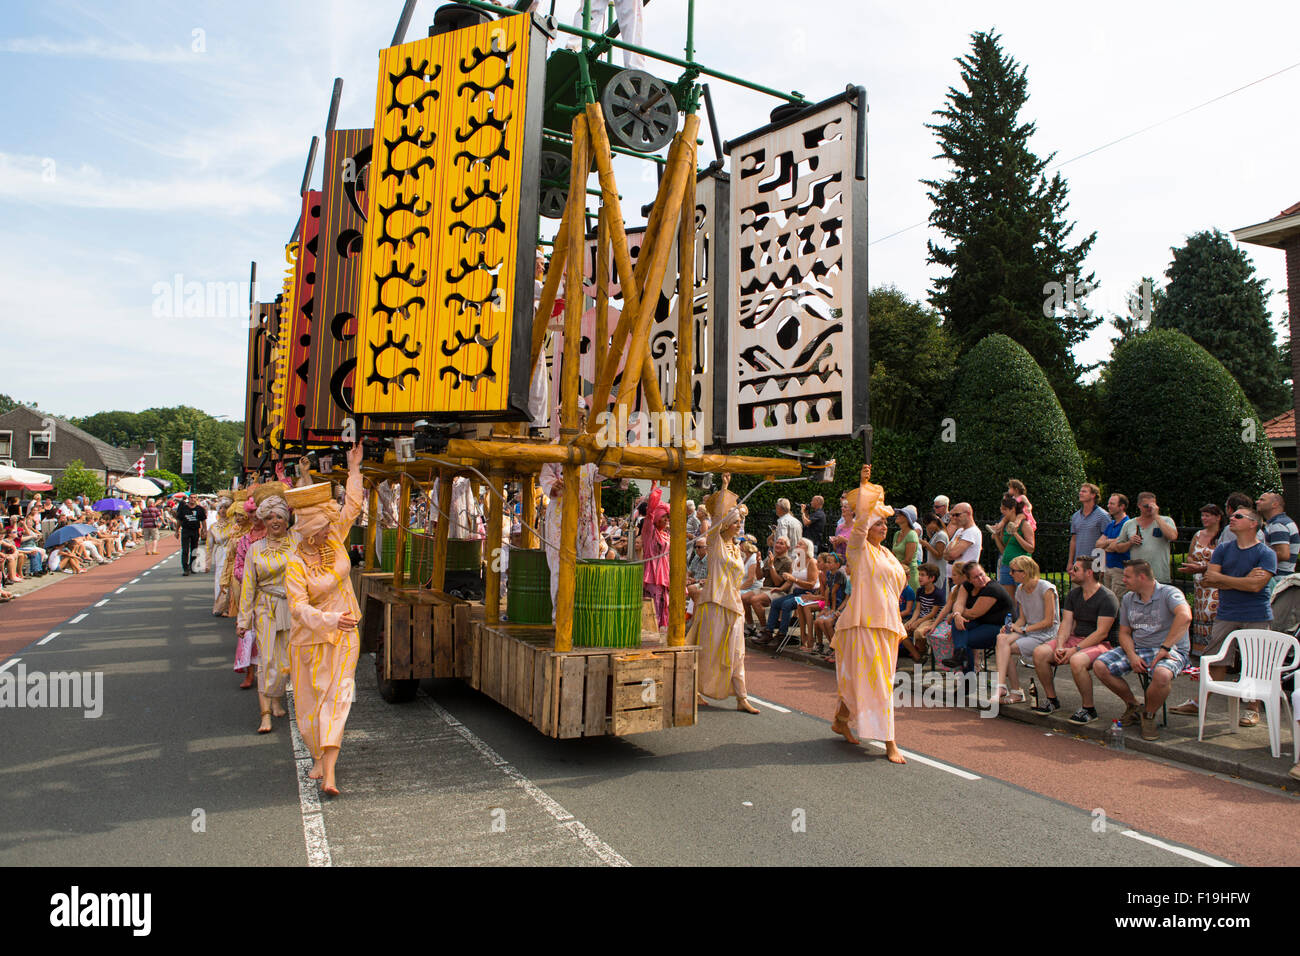 Cultural parade in the village Heeze in the Netherlands depicting the history of the 'Vlisco' company and its founder.... Stock Photo